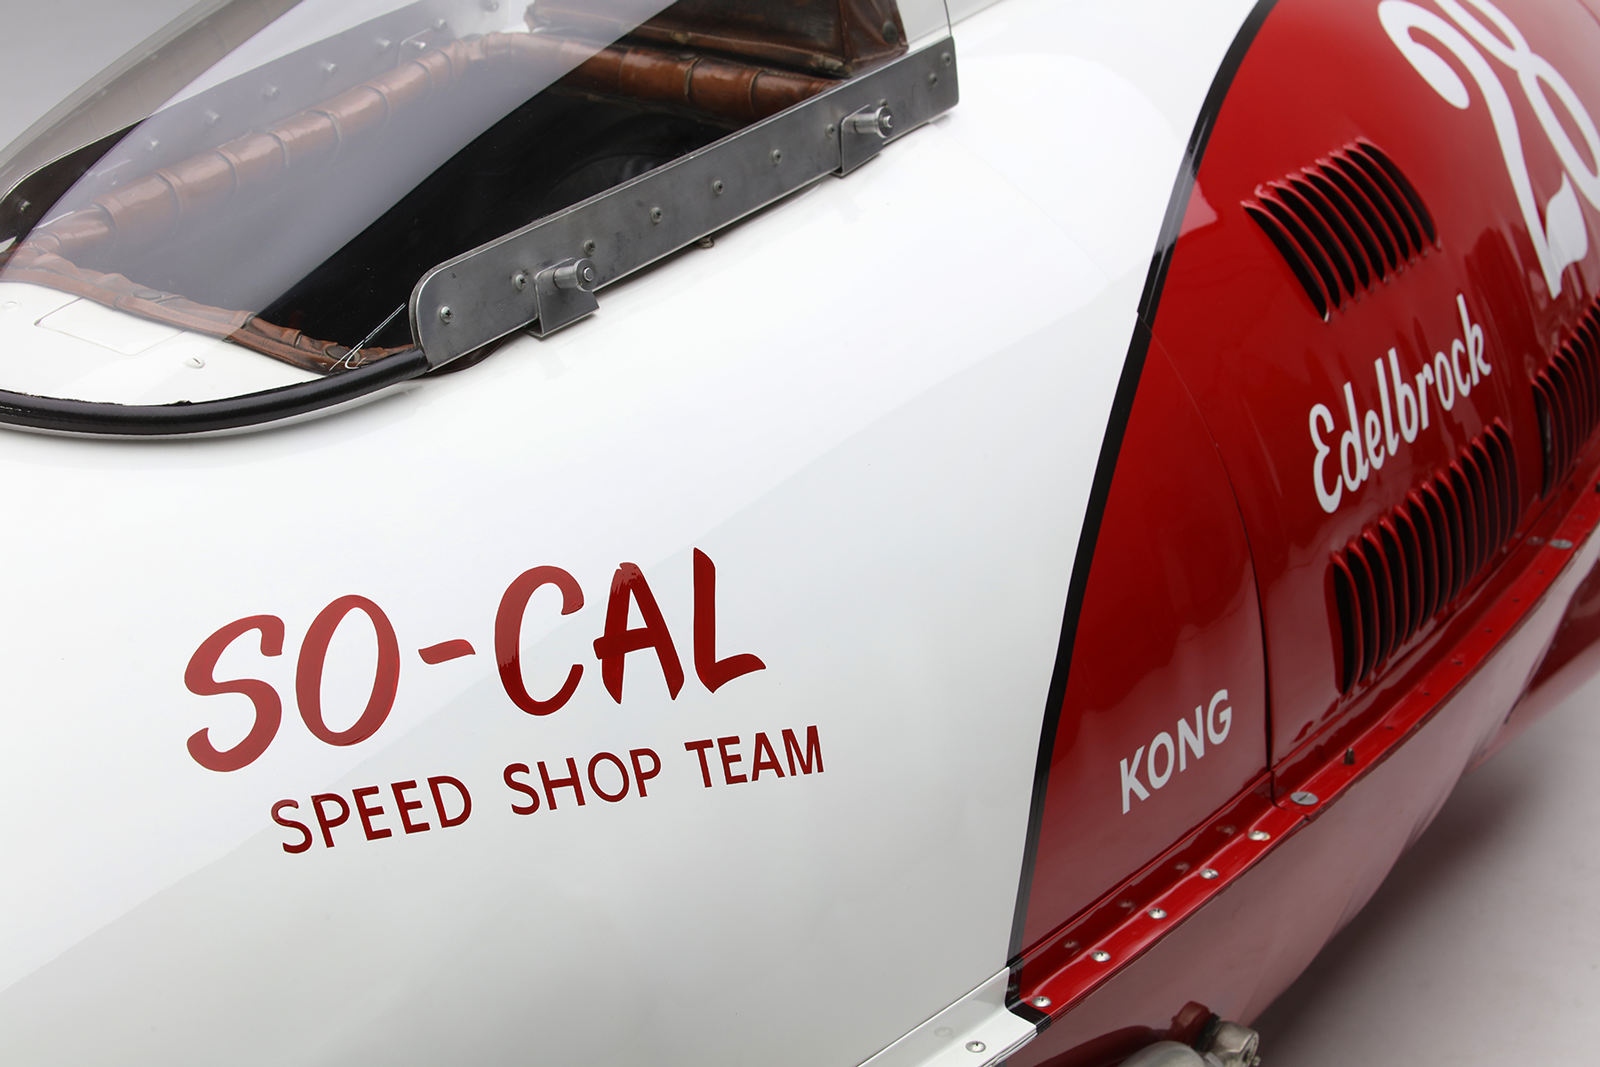 Classic & Sports Car – Meeting Alex Xydias and the iconic So-Cal Belly Tank Lakester